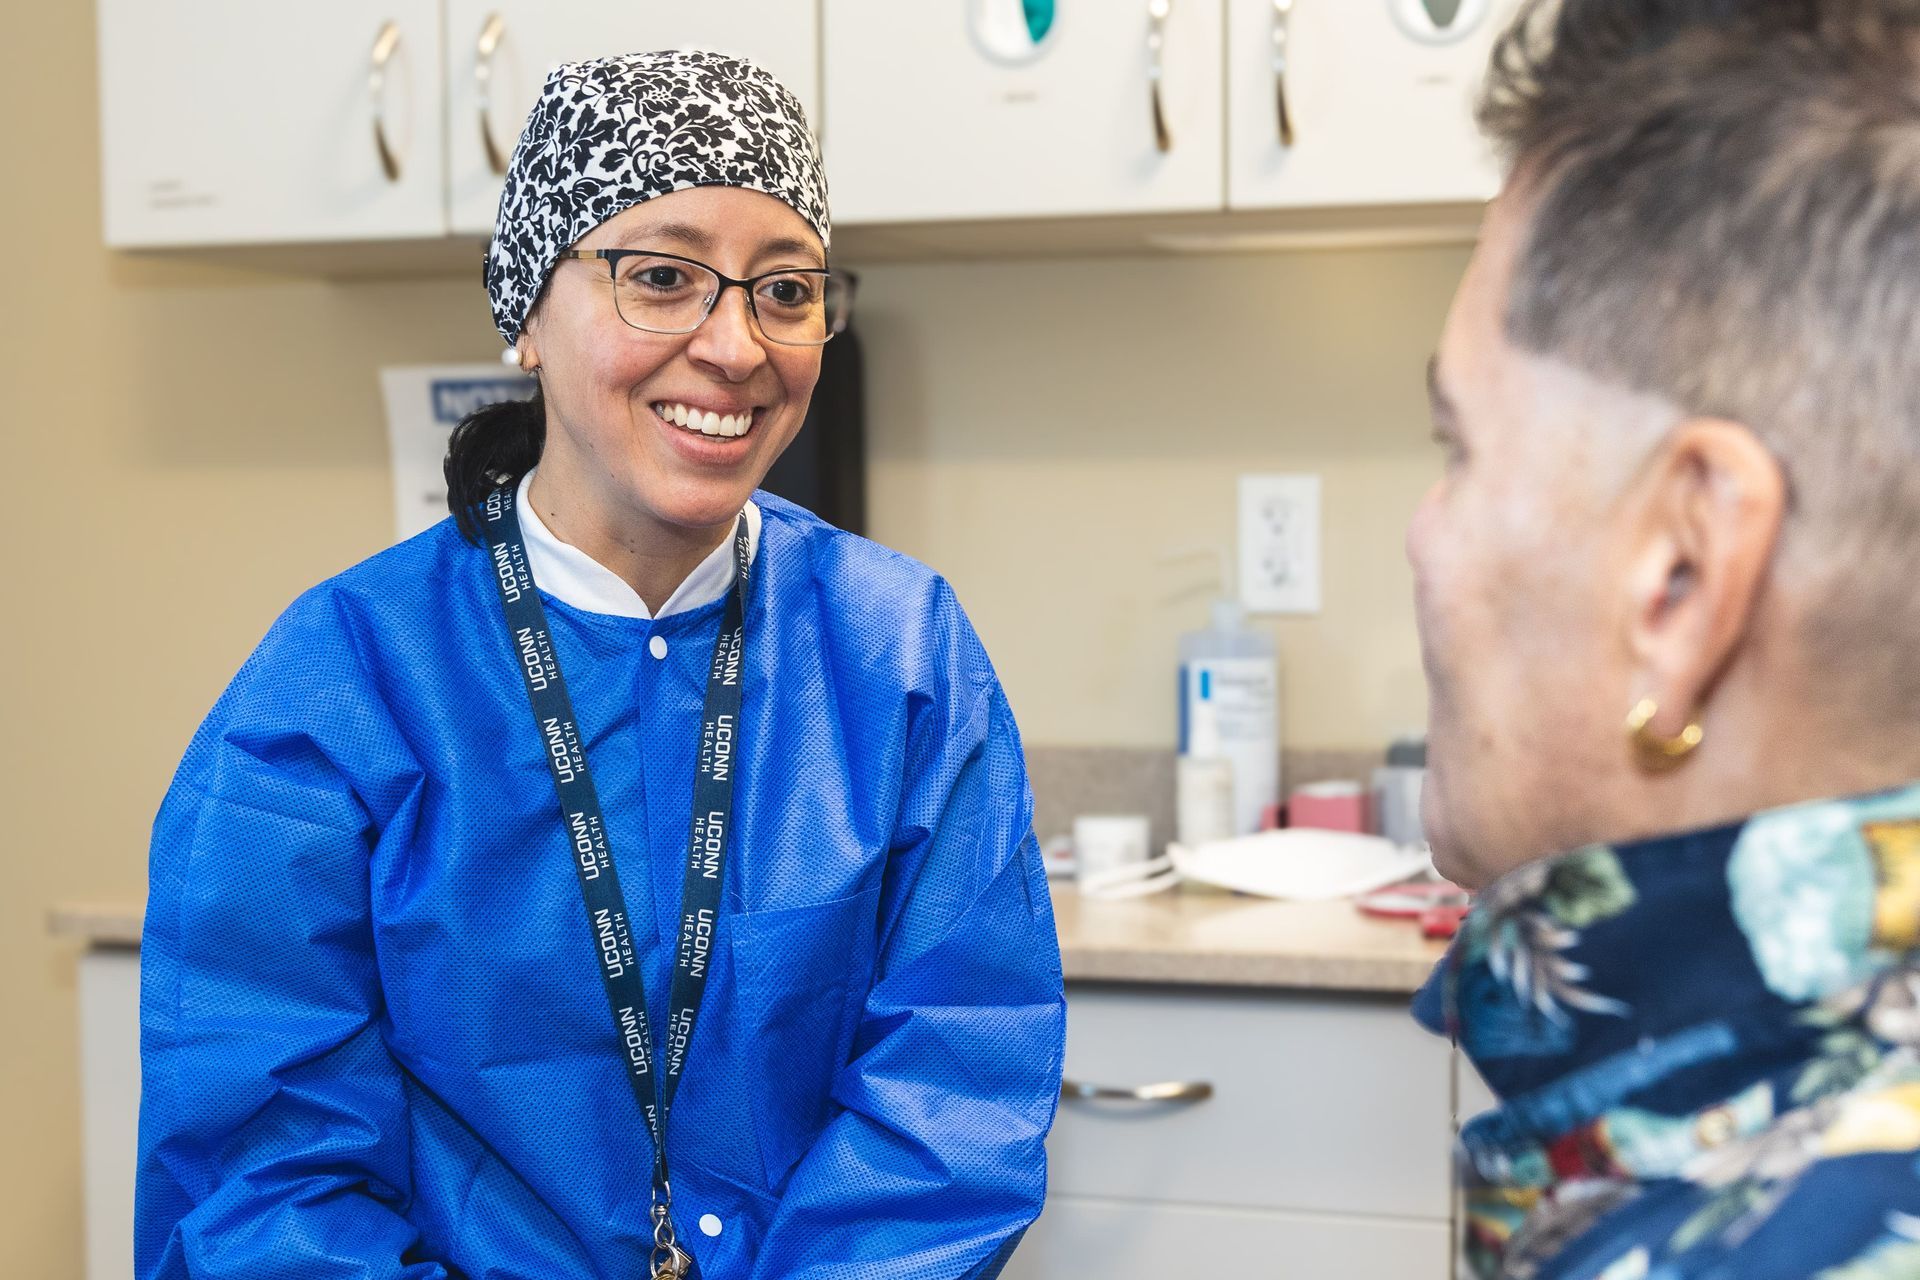 An image of a dentist smiling while looking at a patient